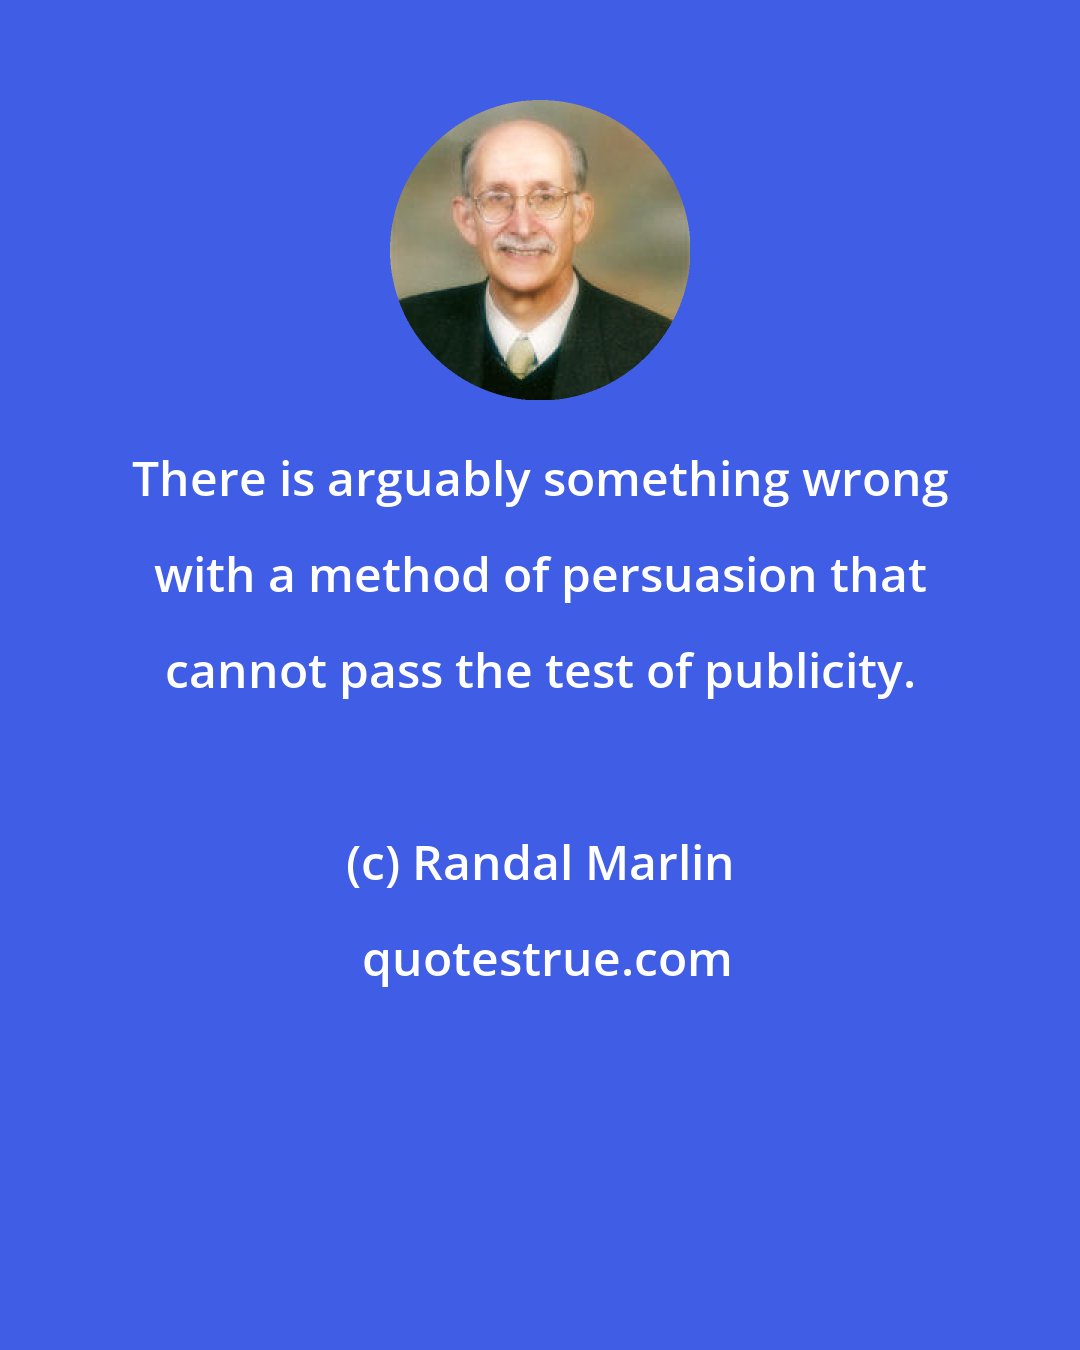 Randal Marlin: There is arguably something wrong with a method of persuasion that cannot pass the test of publicity.